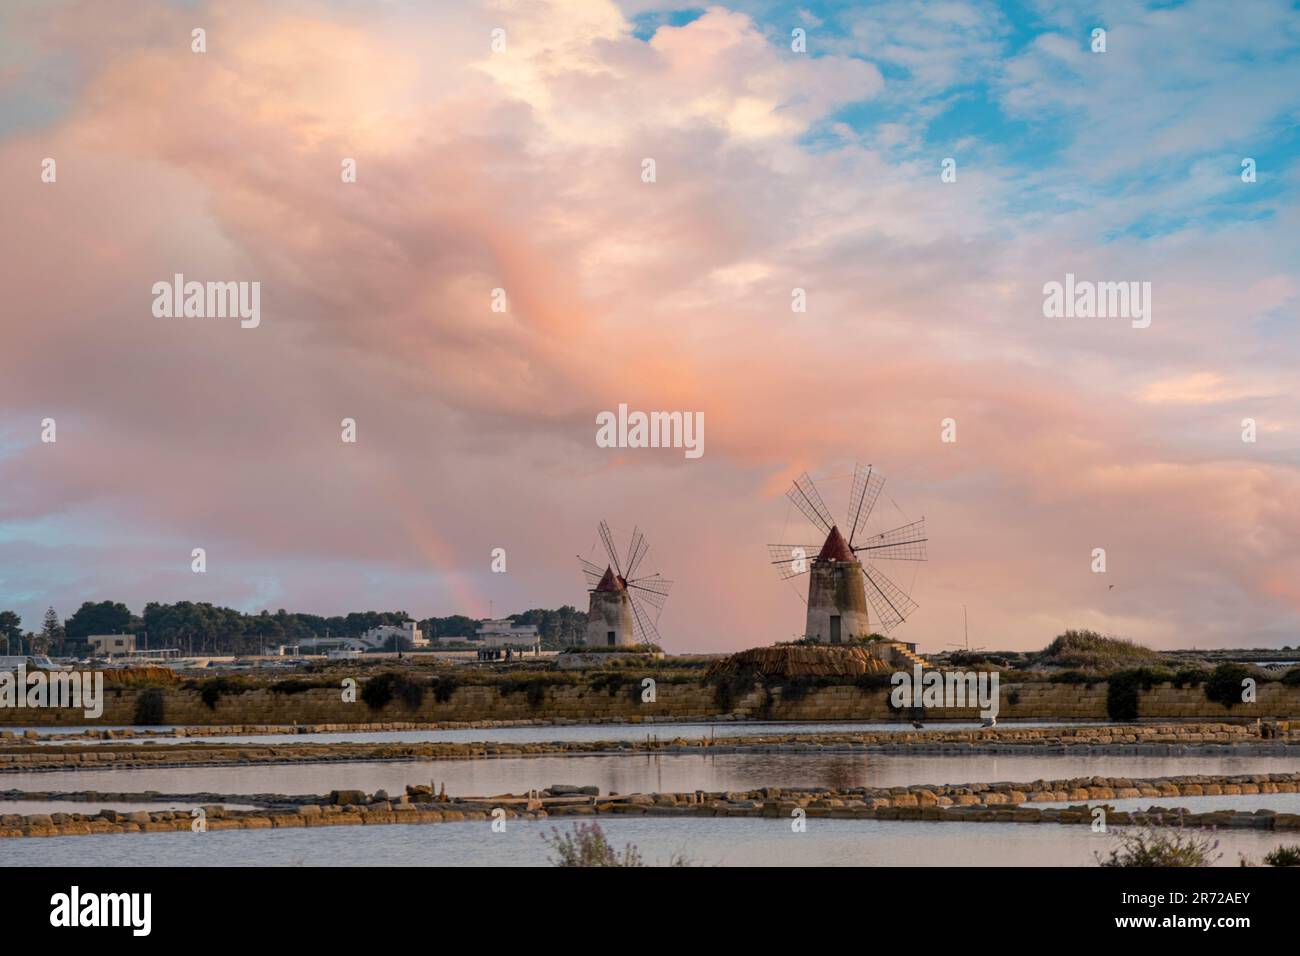 Sunset at the salt flats with the old windmill, saline dello Stagnone. Marsala, Trapani, Sicily, Italy, Europe. Stock Photo